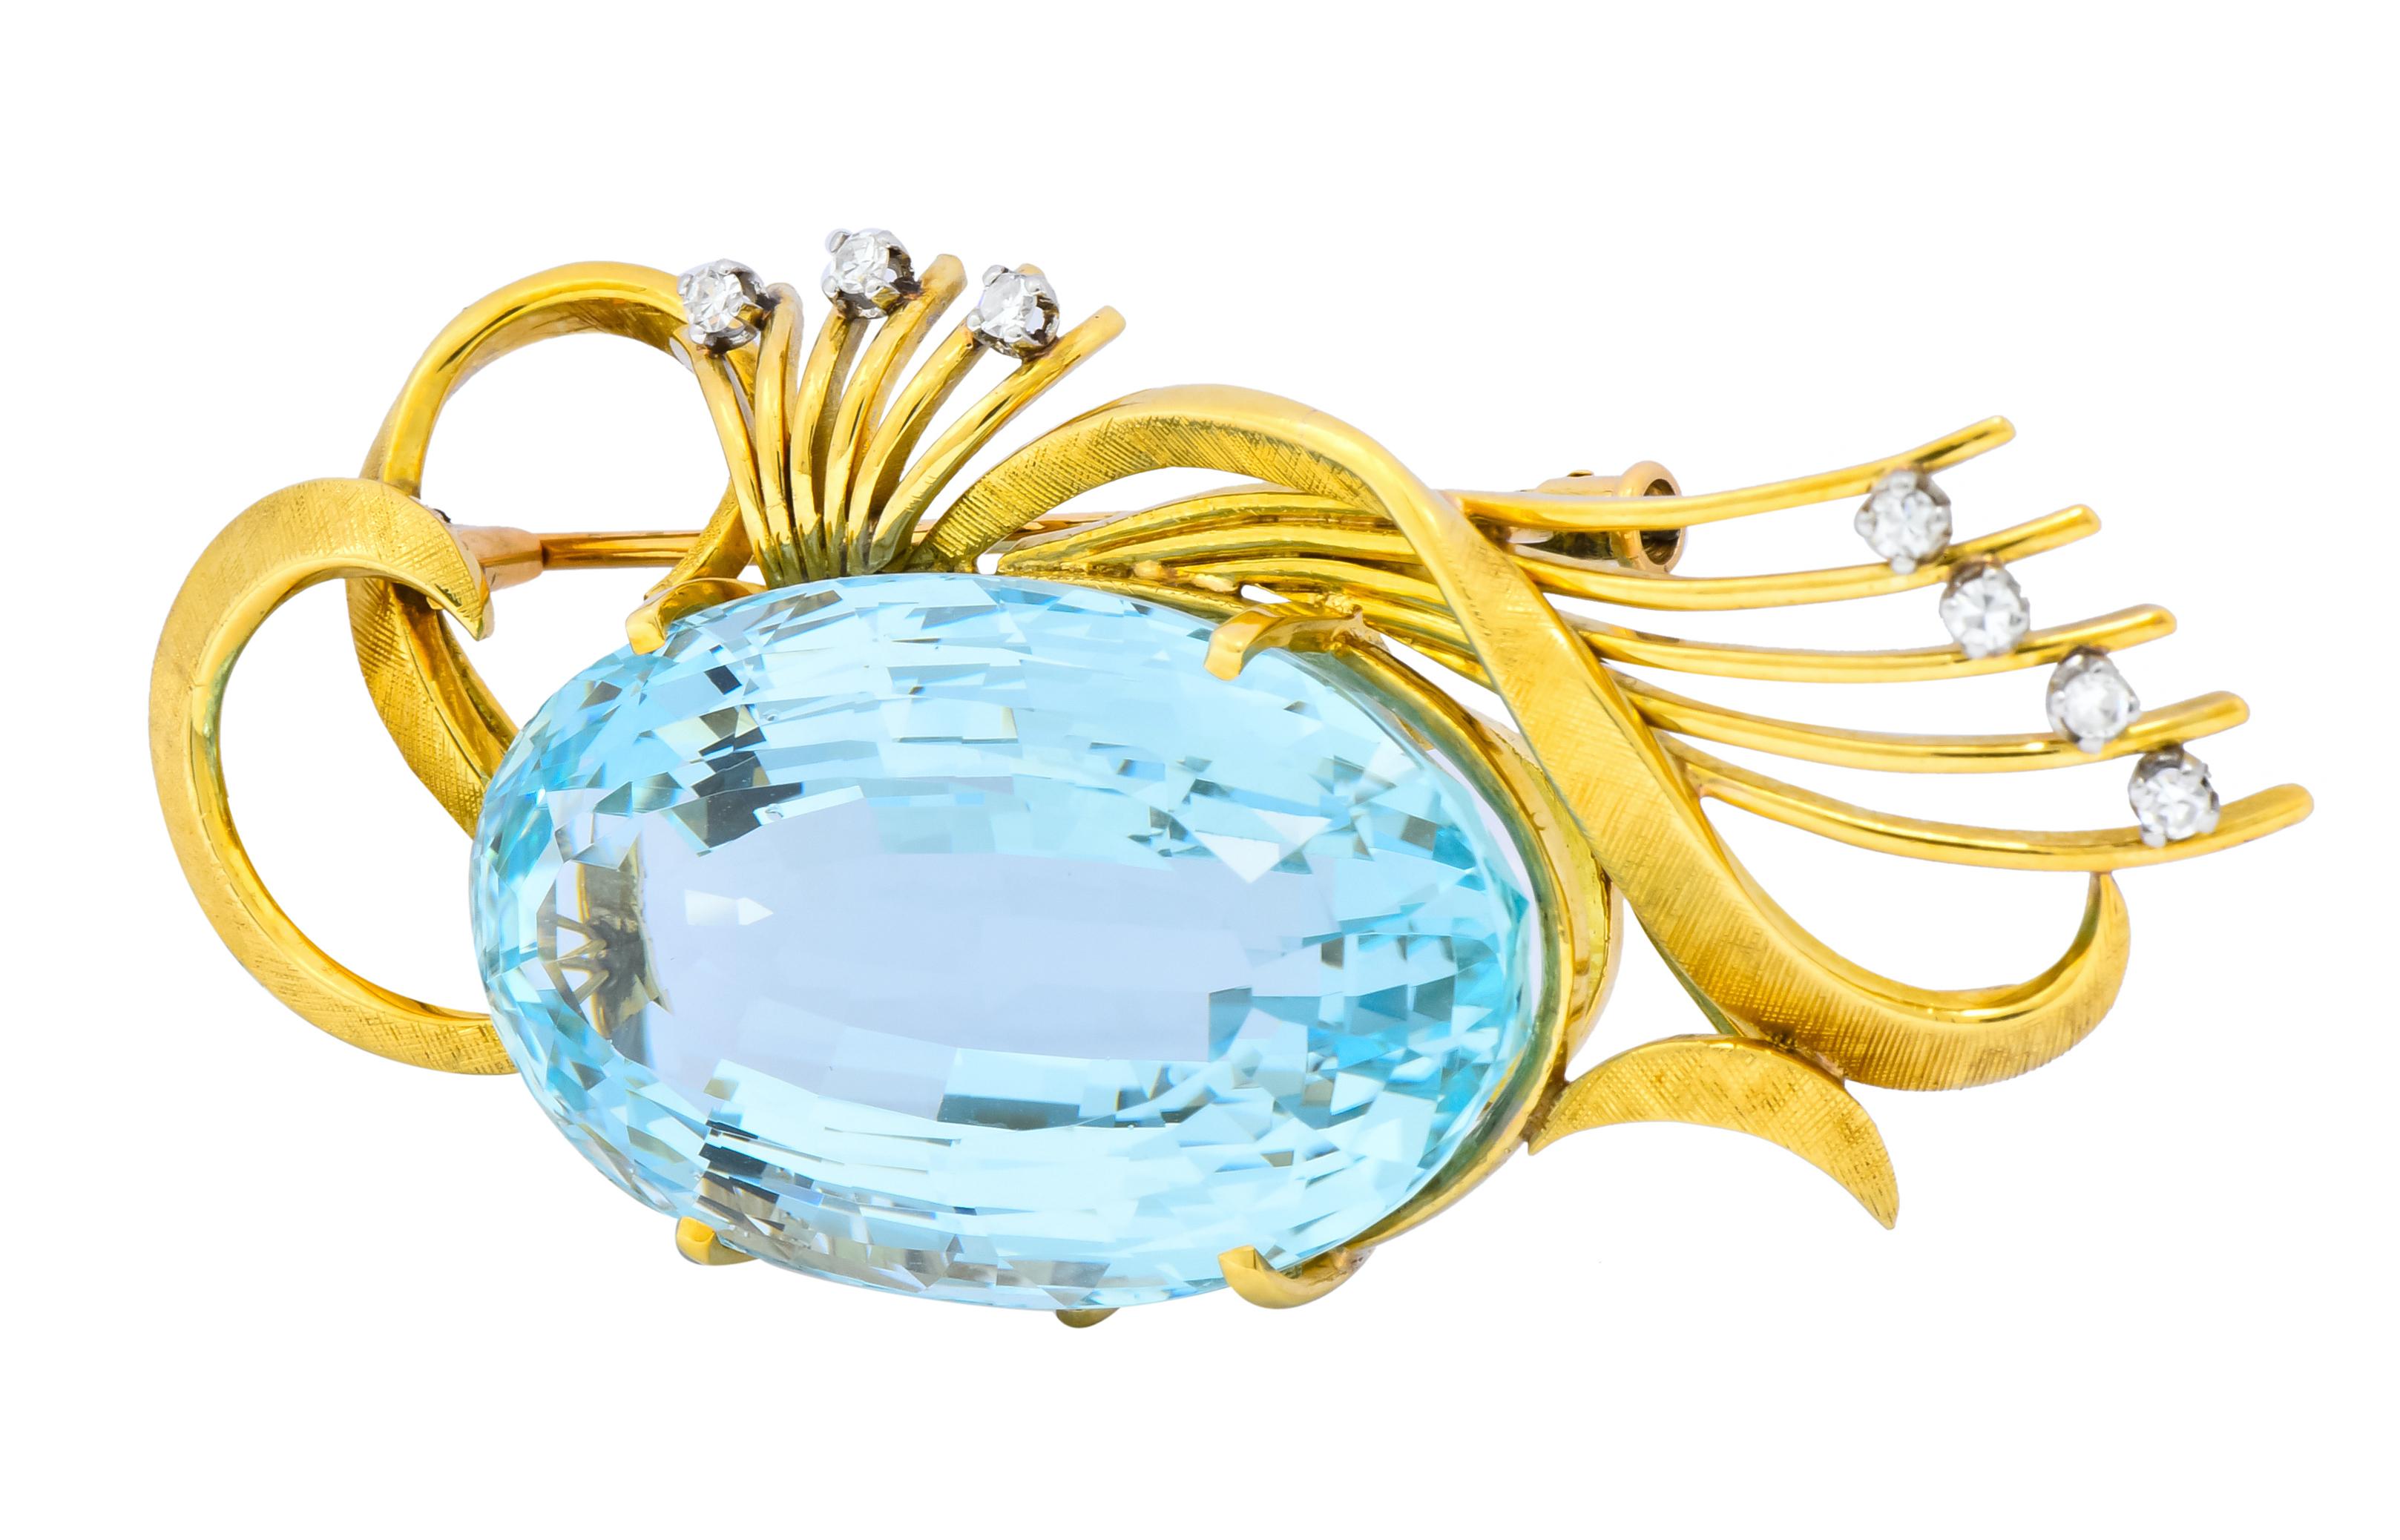 Centering a prong set oval cut aquamarine weighing approximately 55.00 carats, transparent and a vibrant sky blue color

Scrolled and linear gold elements accented by diamonds weighing approximately 0.15 carat total, E/F color and VS